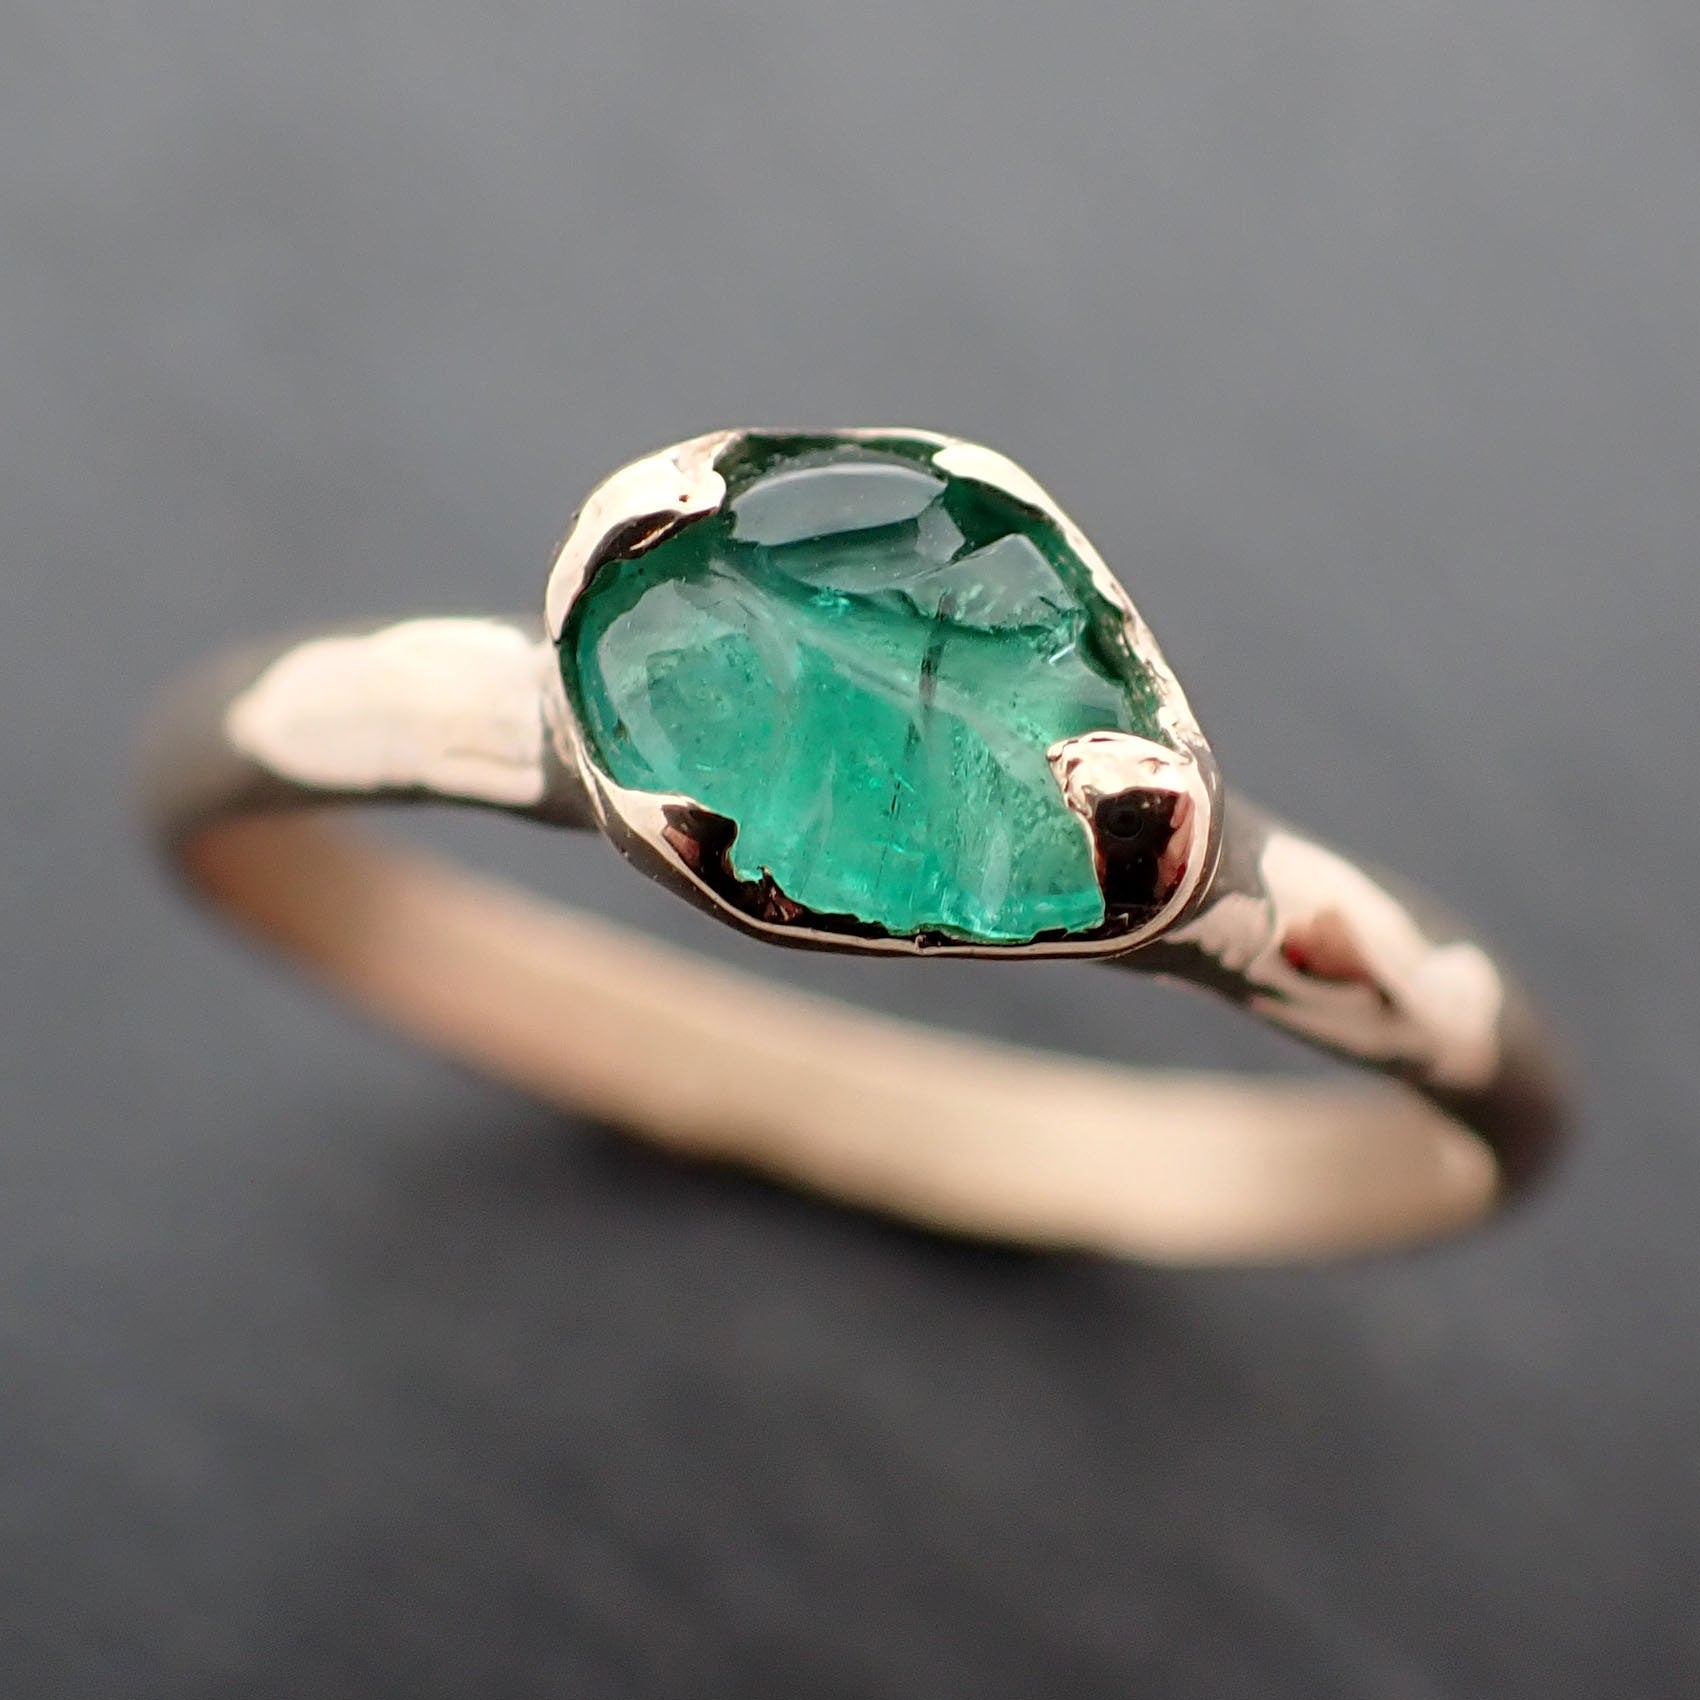 Carved Leaf Emerald Solitaire yellow 14k Gold Ring Birthstone One Of a Kind Gemstone Ring Recycled 3383